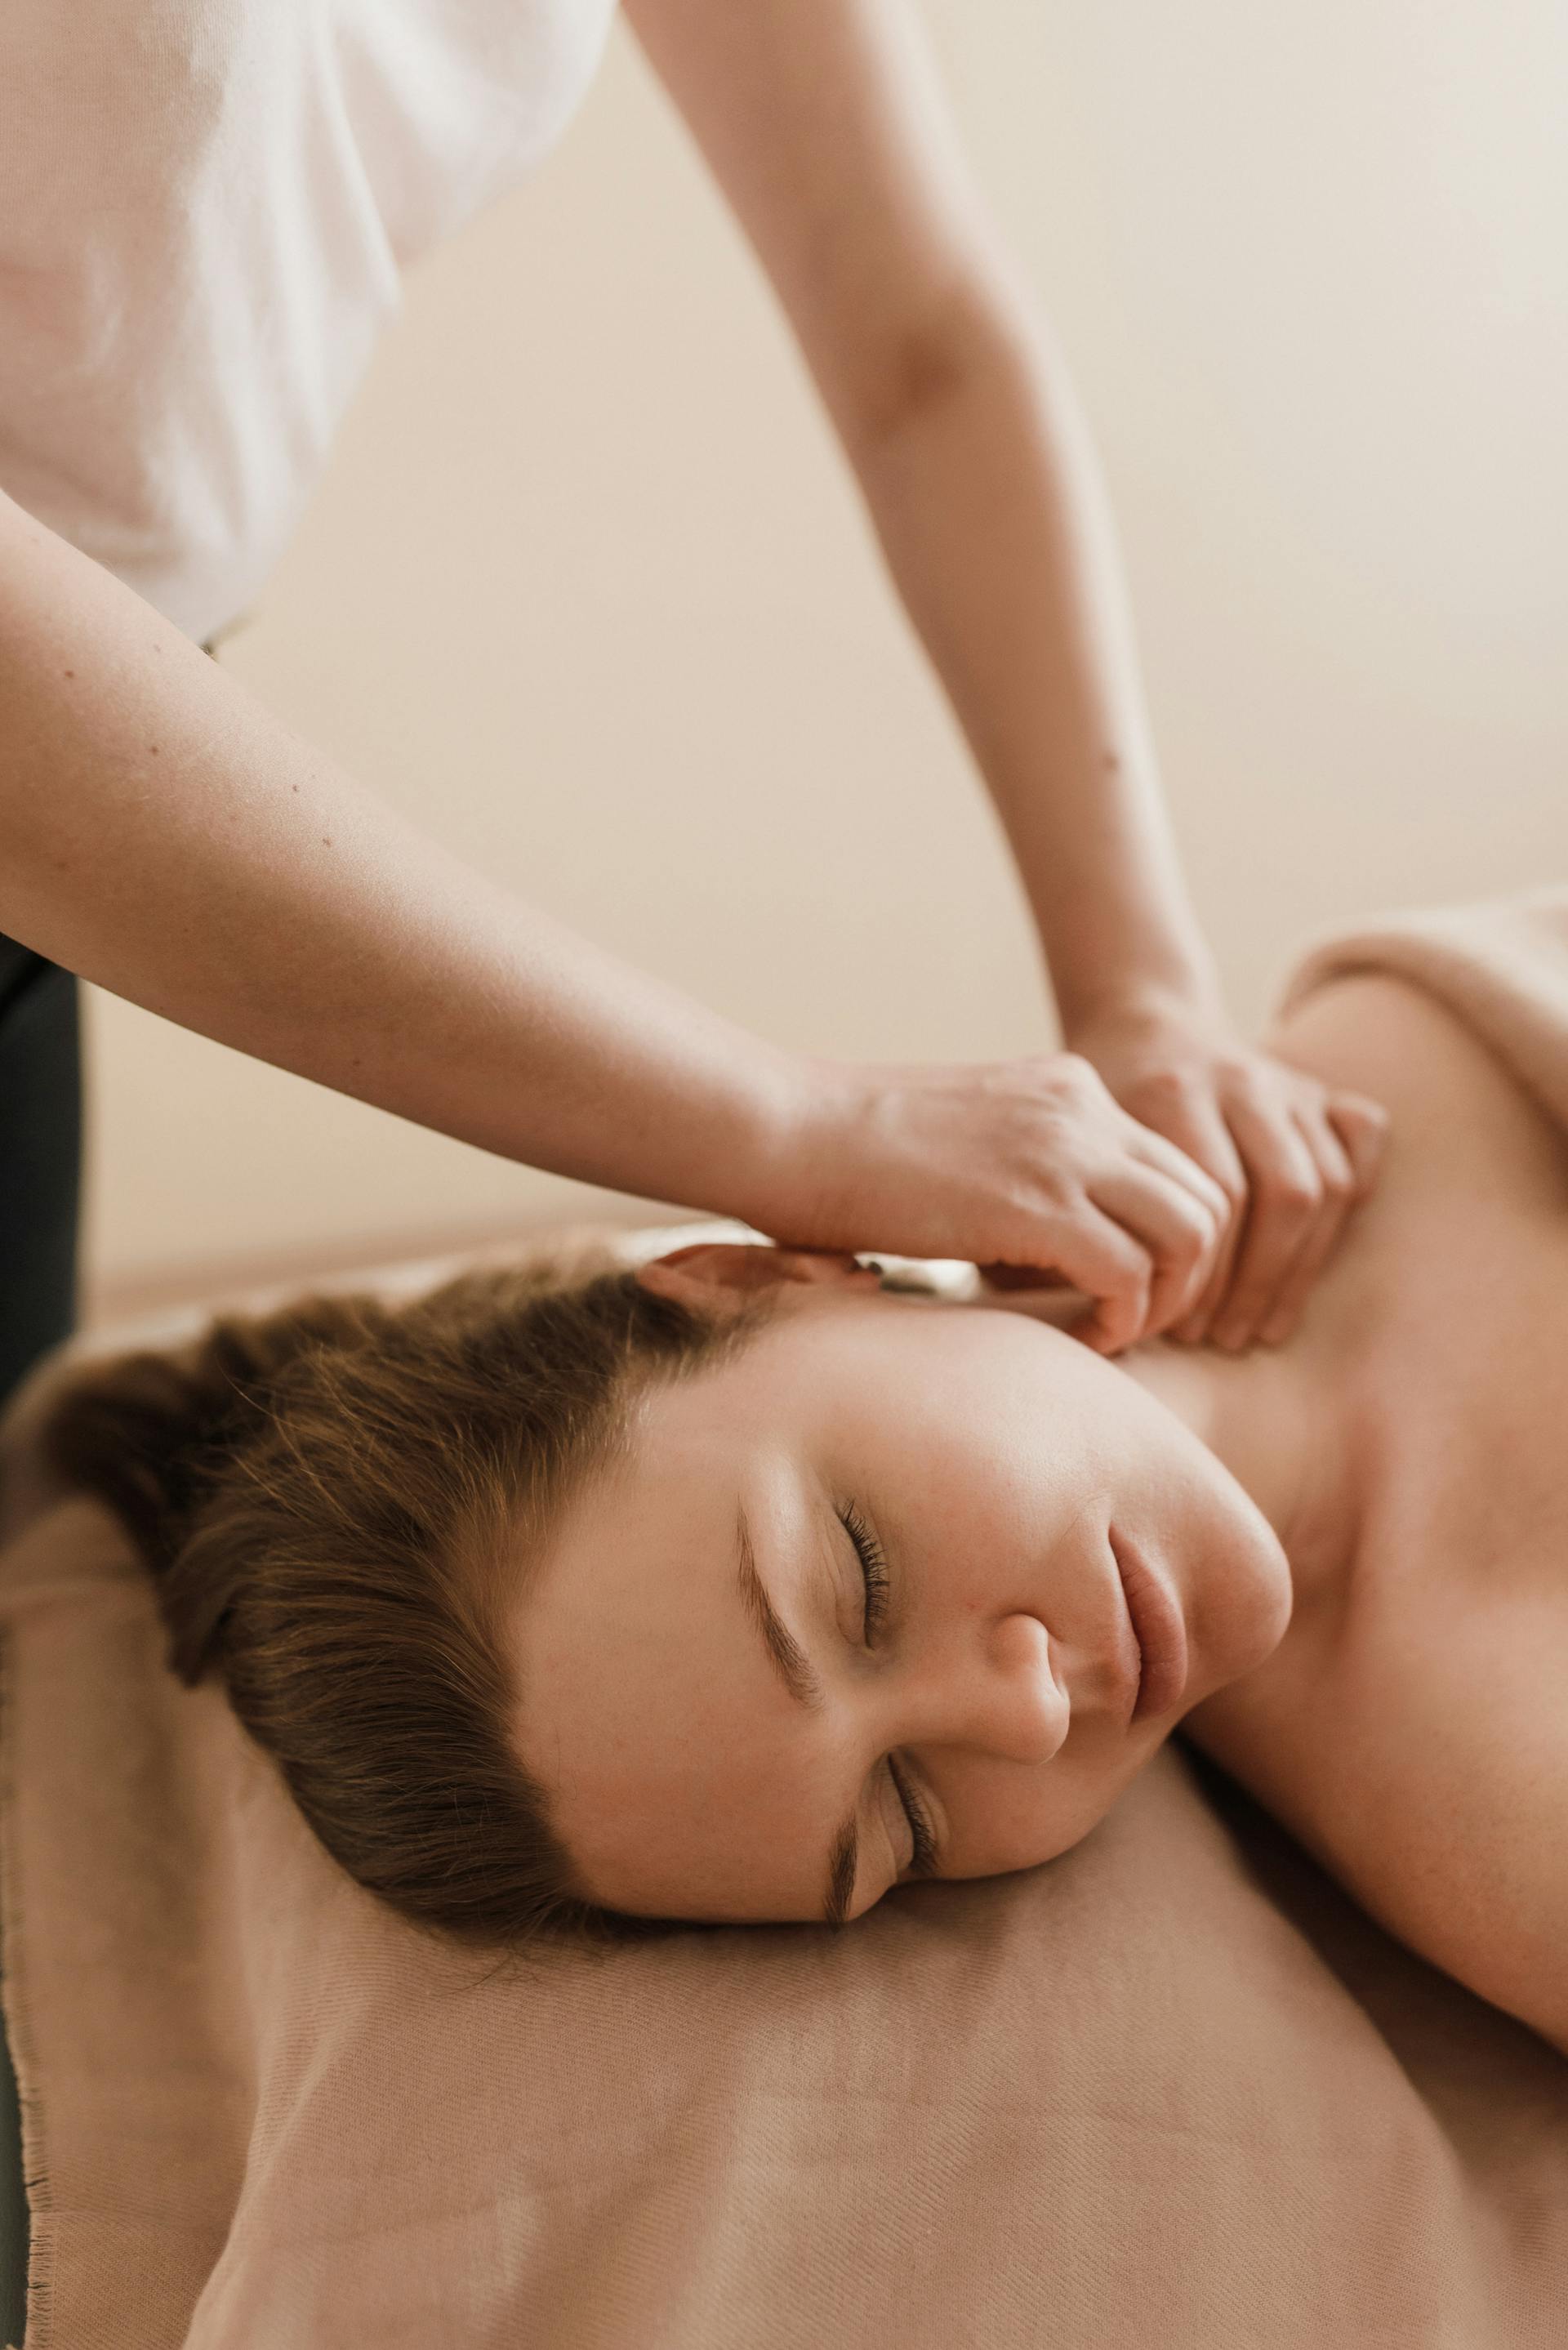 A woman getting a massage | Source: Pexels